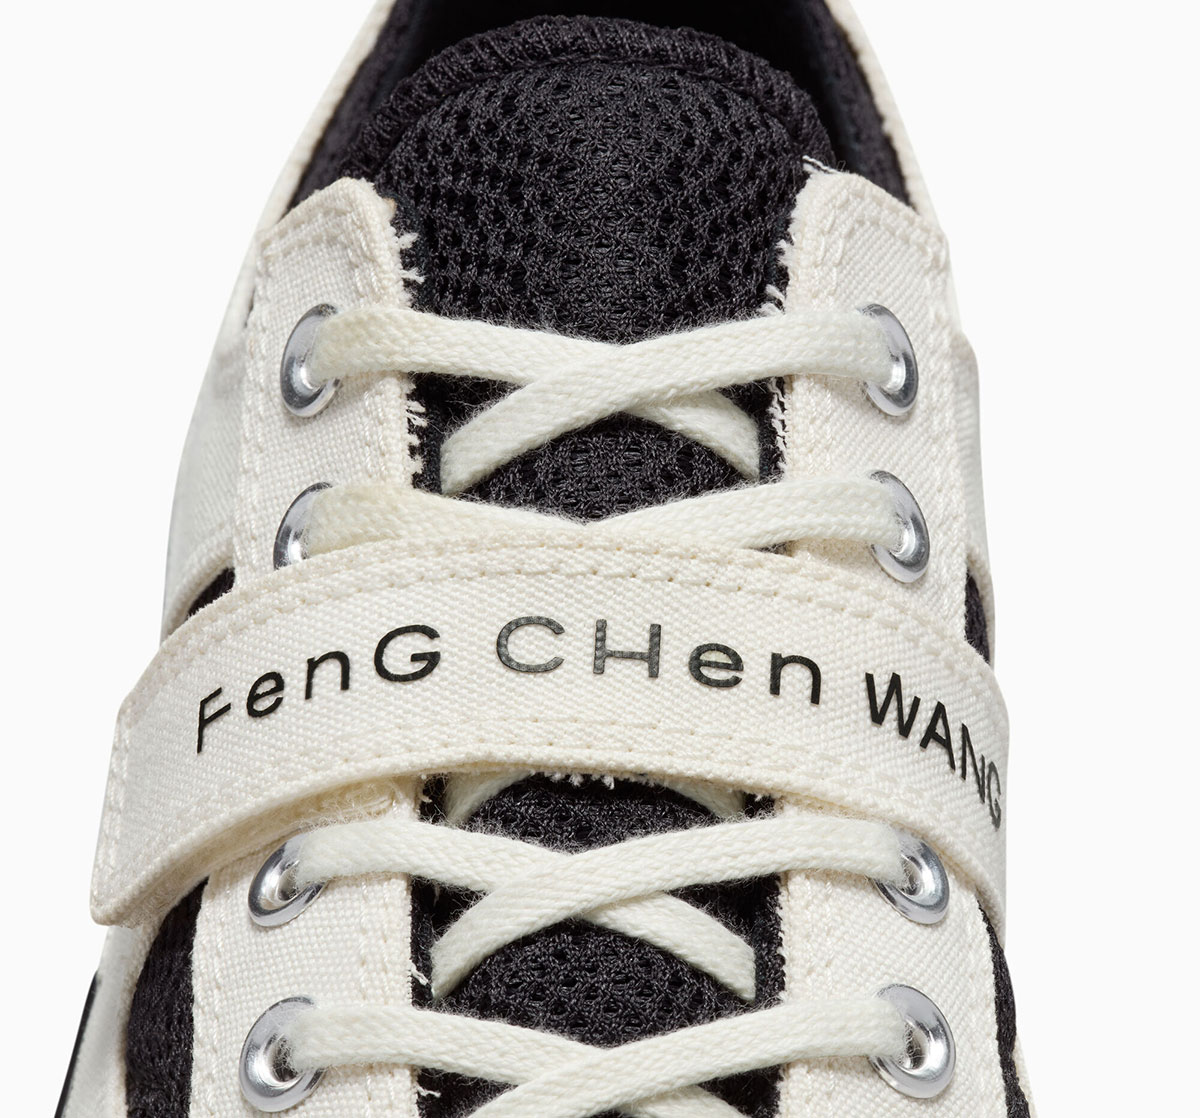 Feng Chen Wang x Converse lace-up sneakers A08857c 4